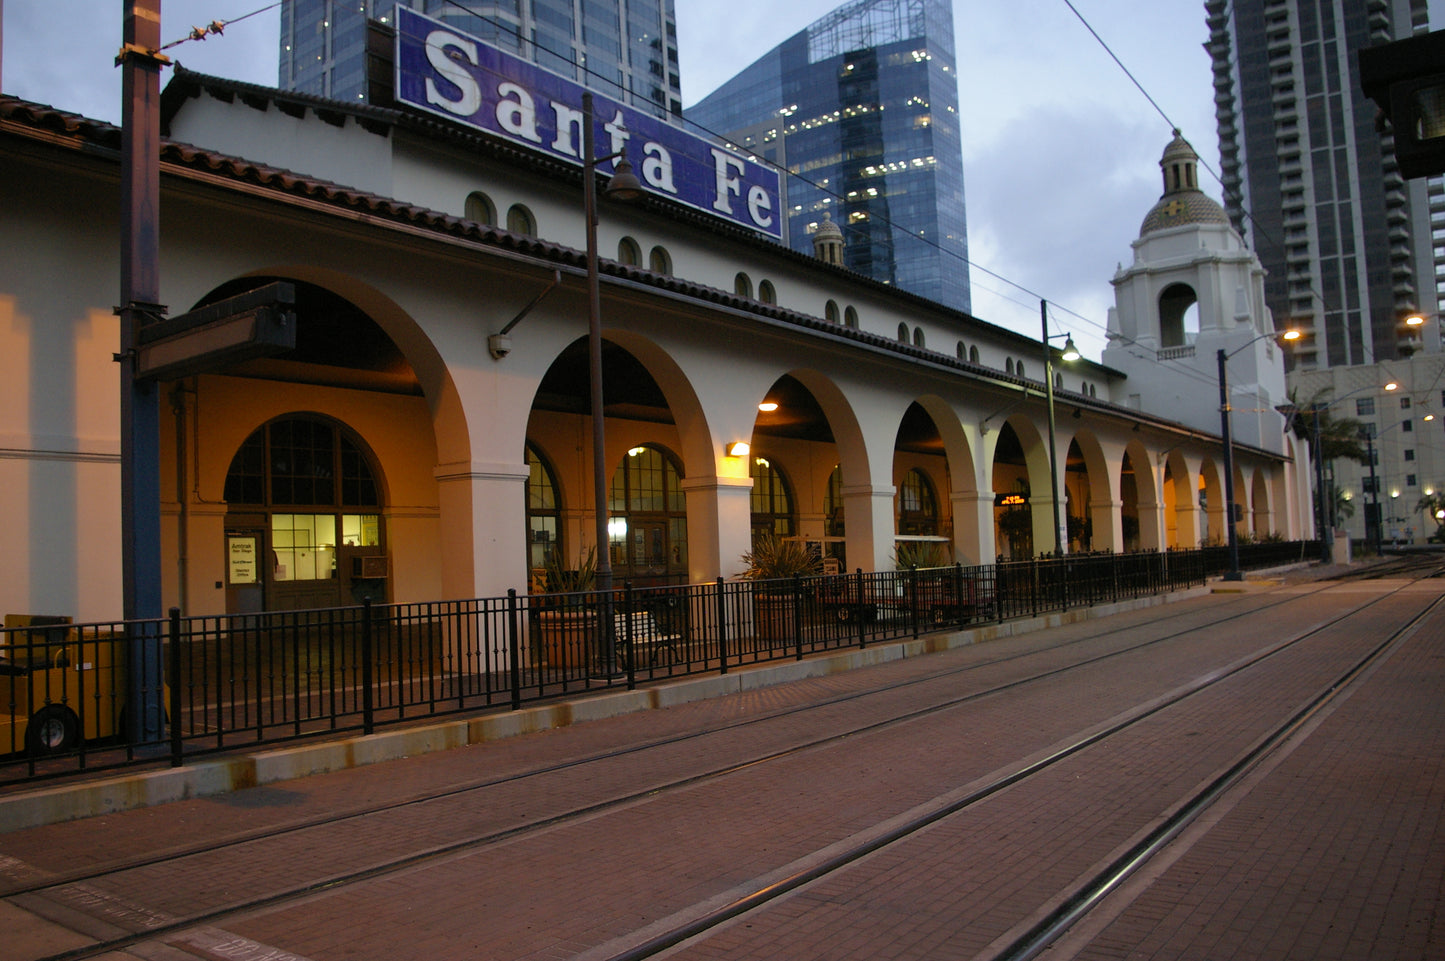 SANTA FE DEPOT DIEGO TRAIN STATION GLOSSY POSTER PICTURE PHOTO PRINT BANNER